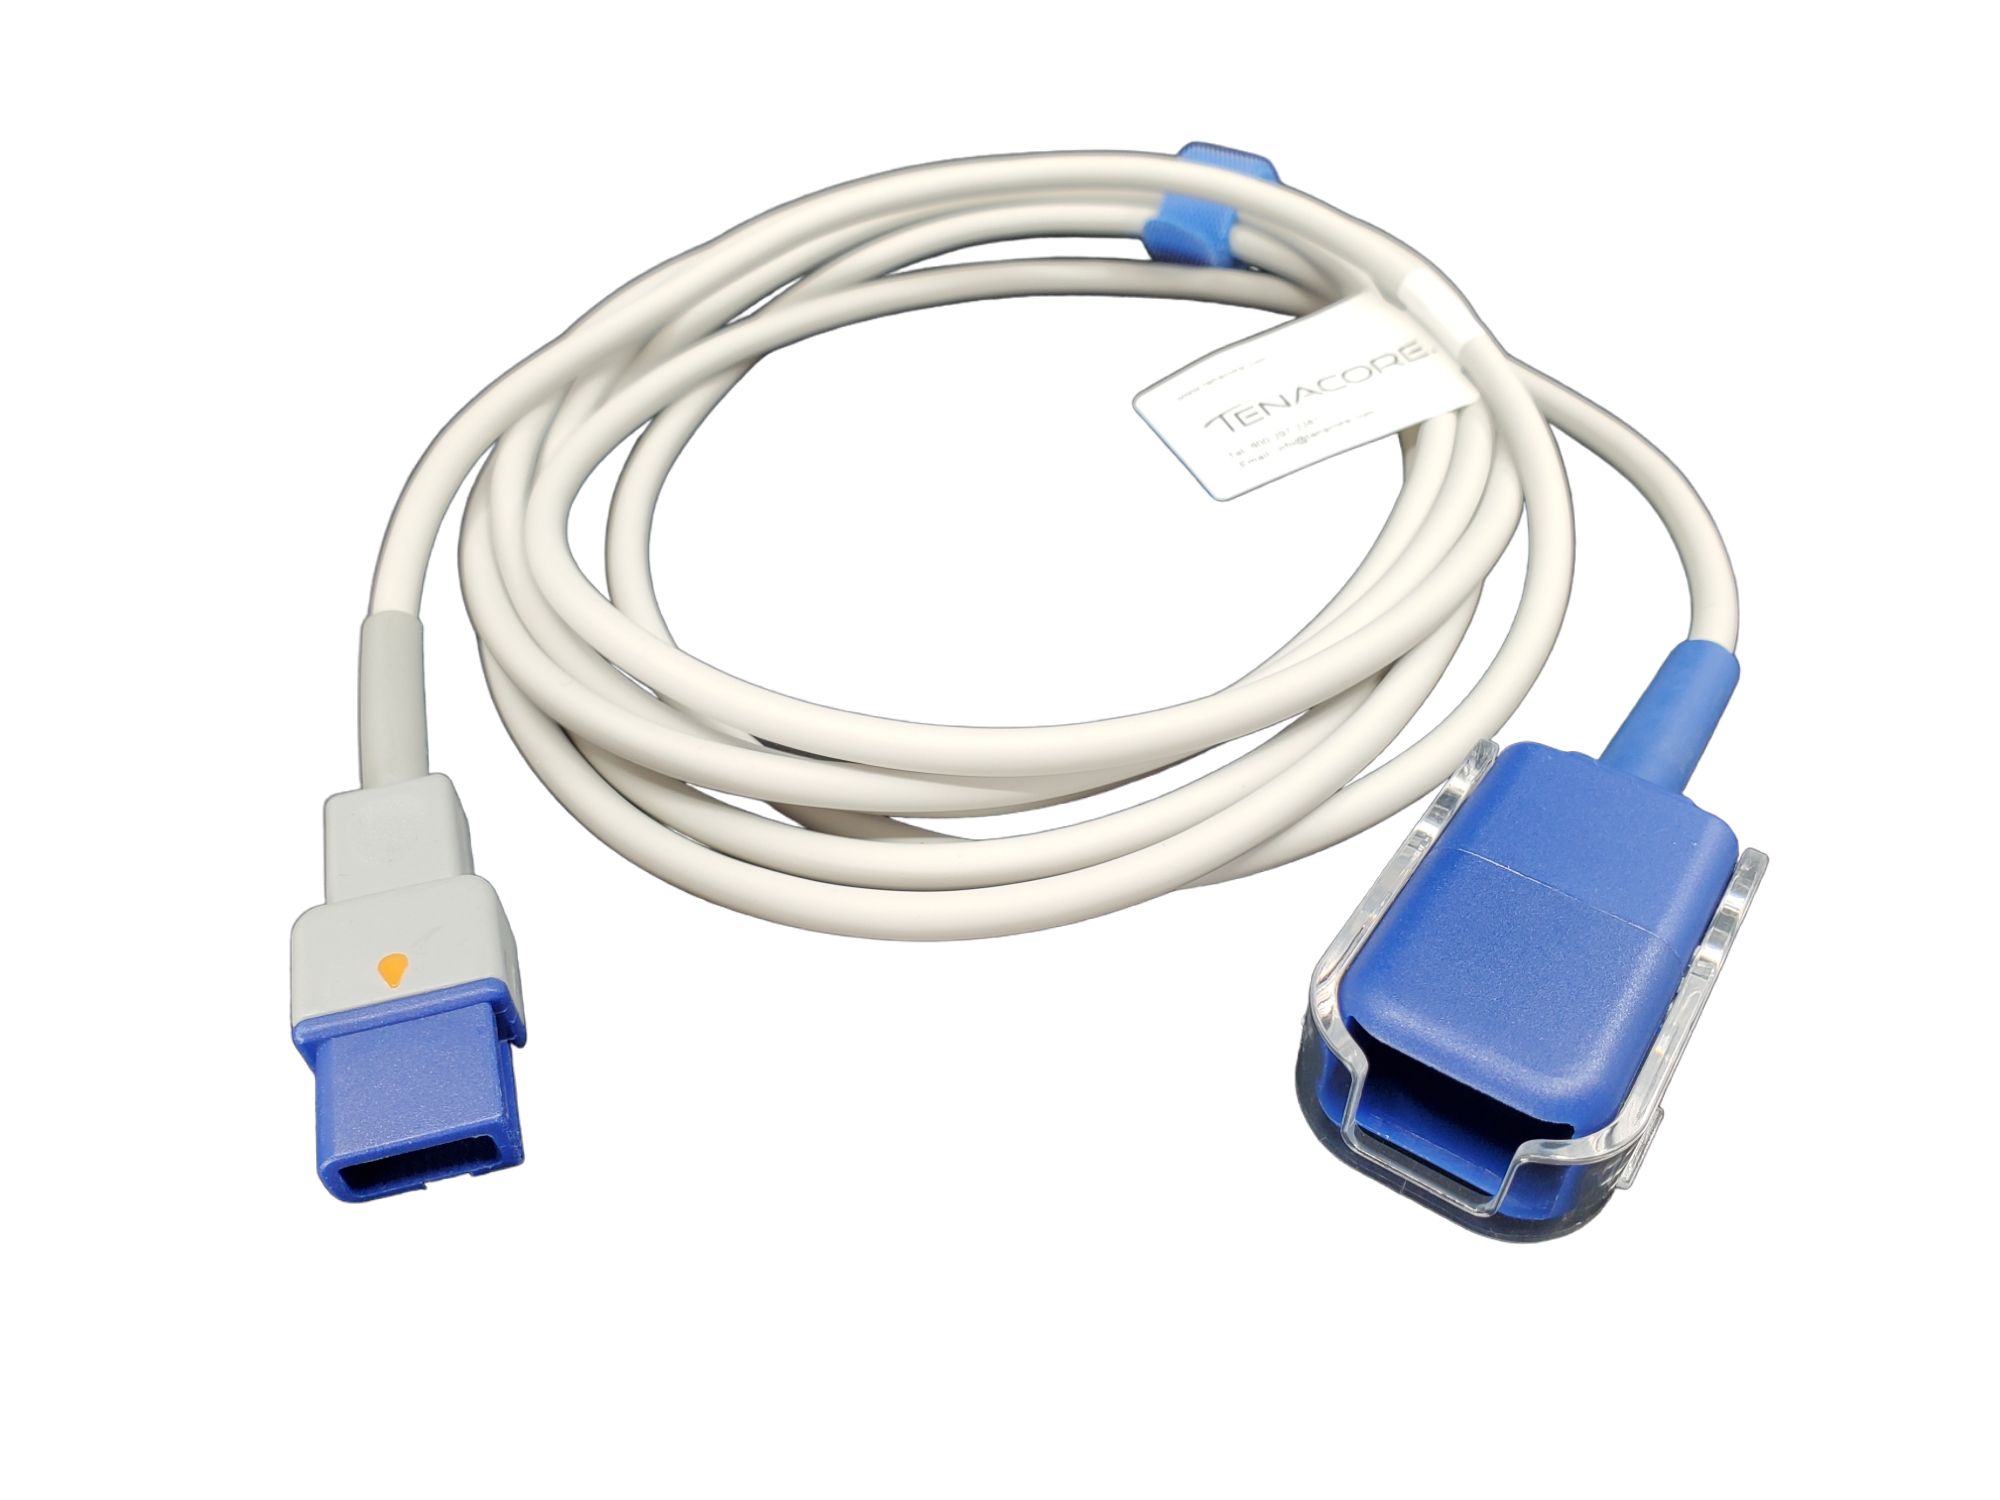 Spacelabs SpO2 Adaptor Cable Replacement: 3.0m, use with Nellcor-Oximax sensor